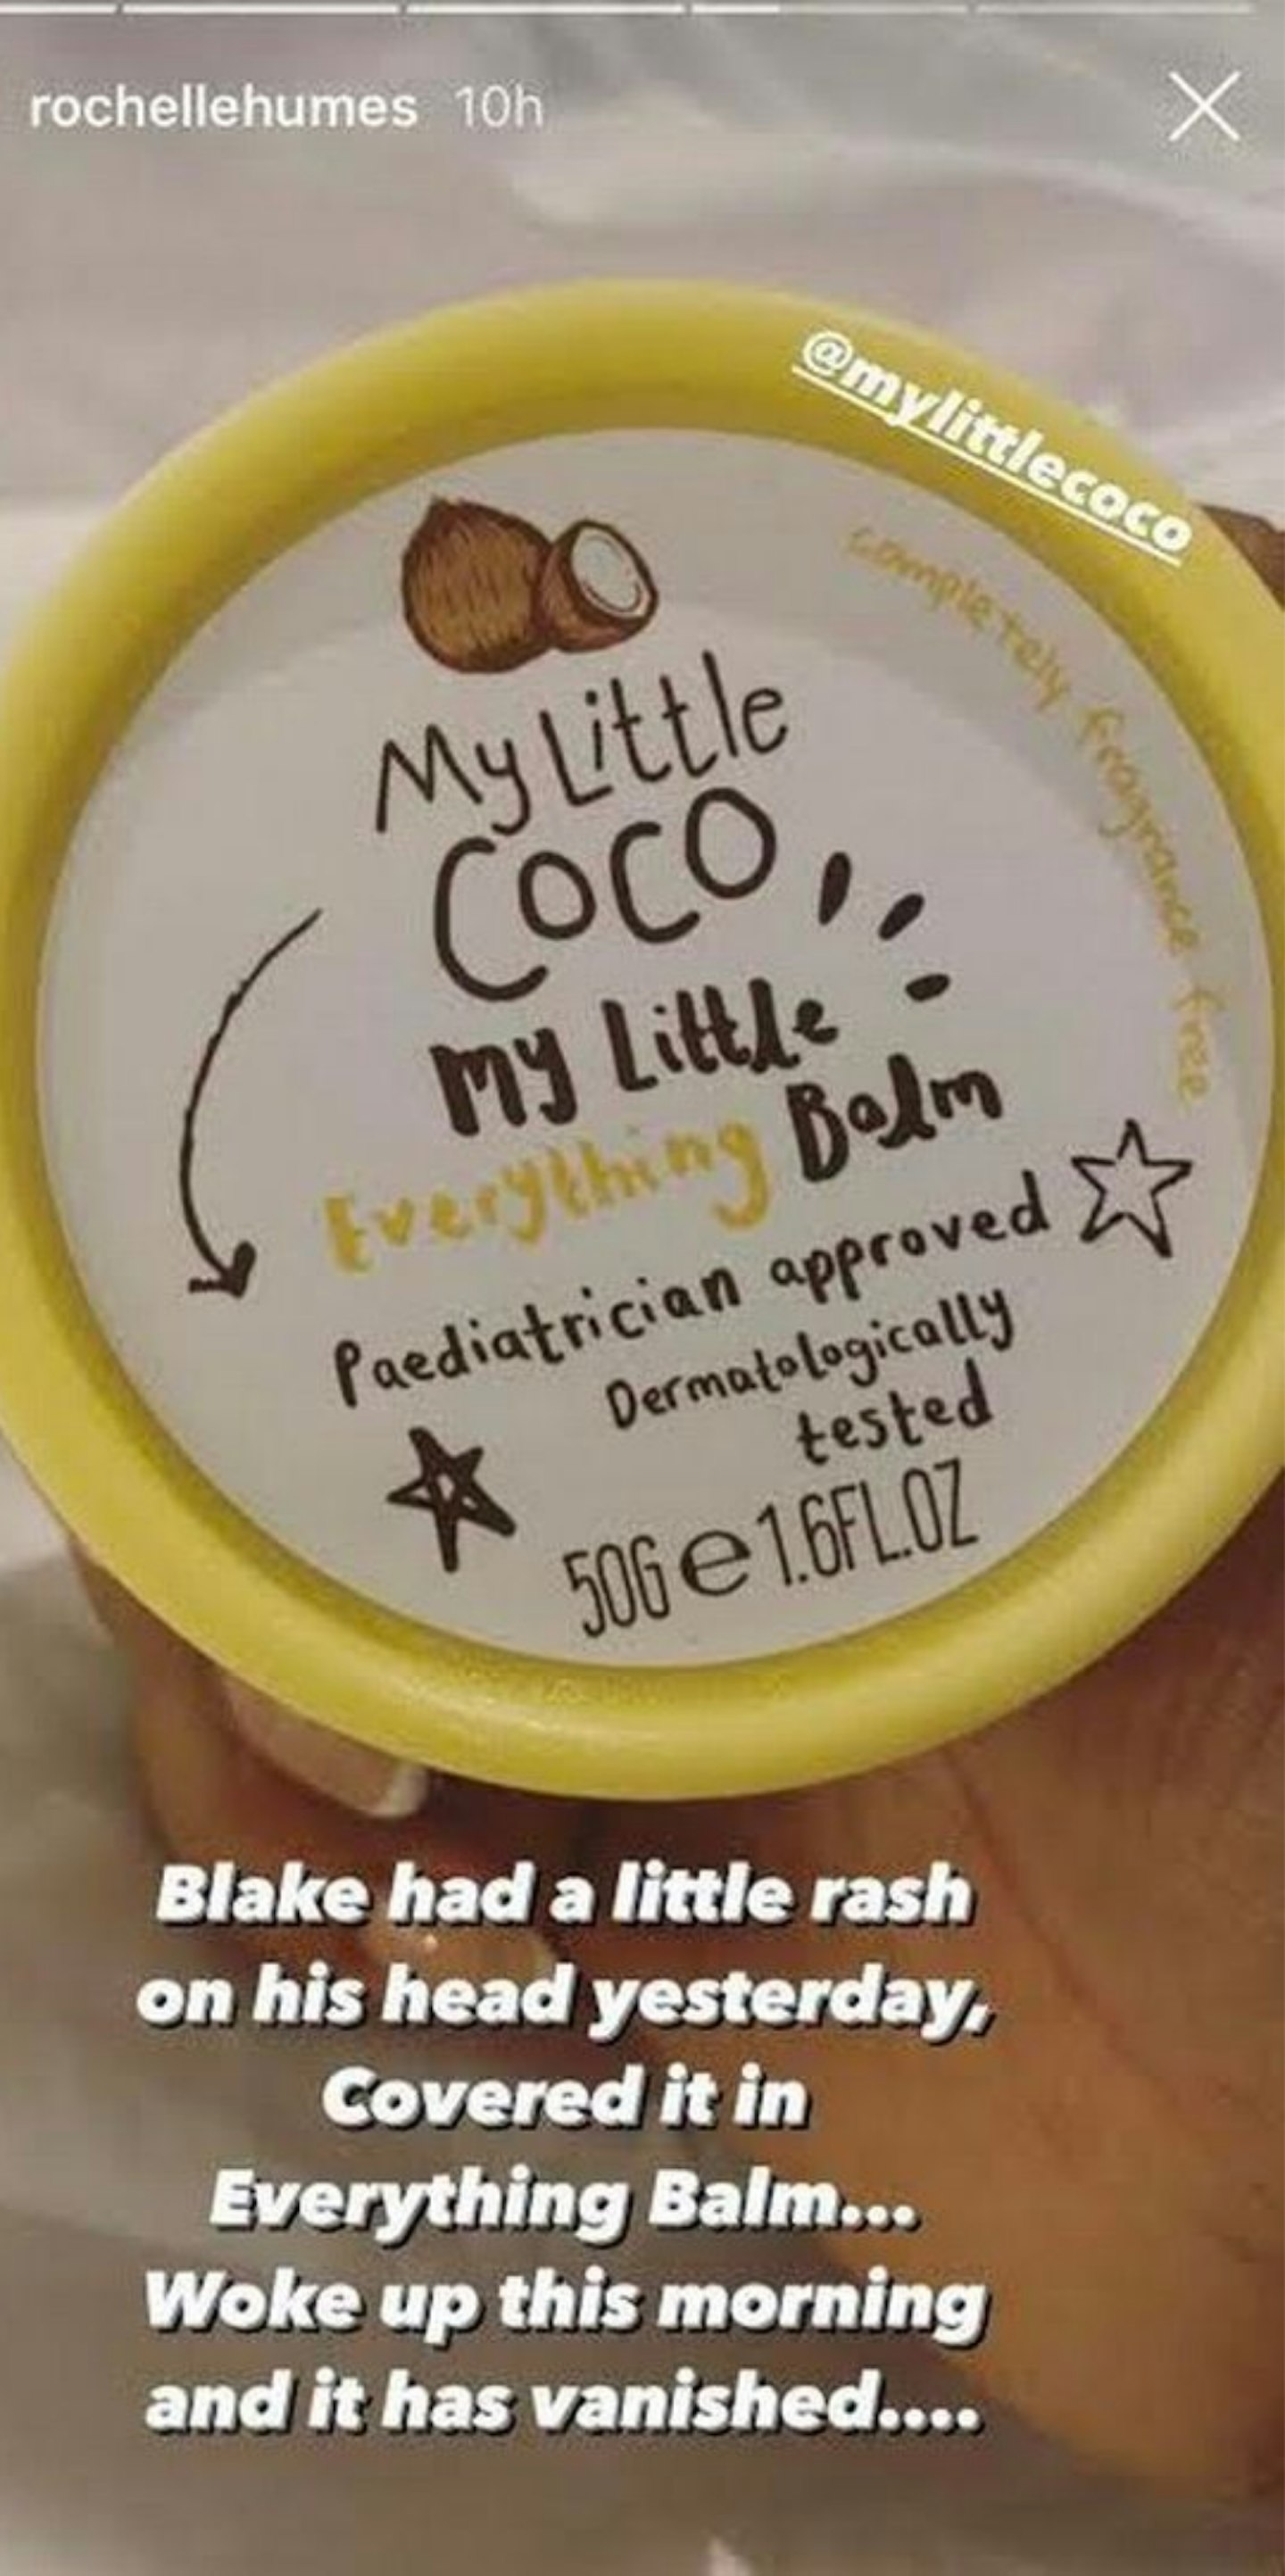 Rochelle Humes shares magic baby balm with followers